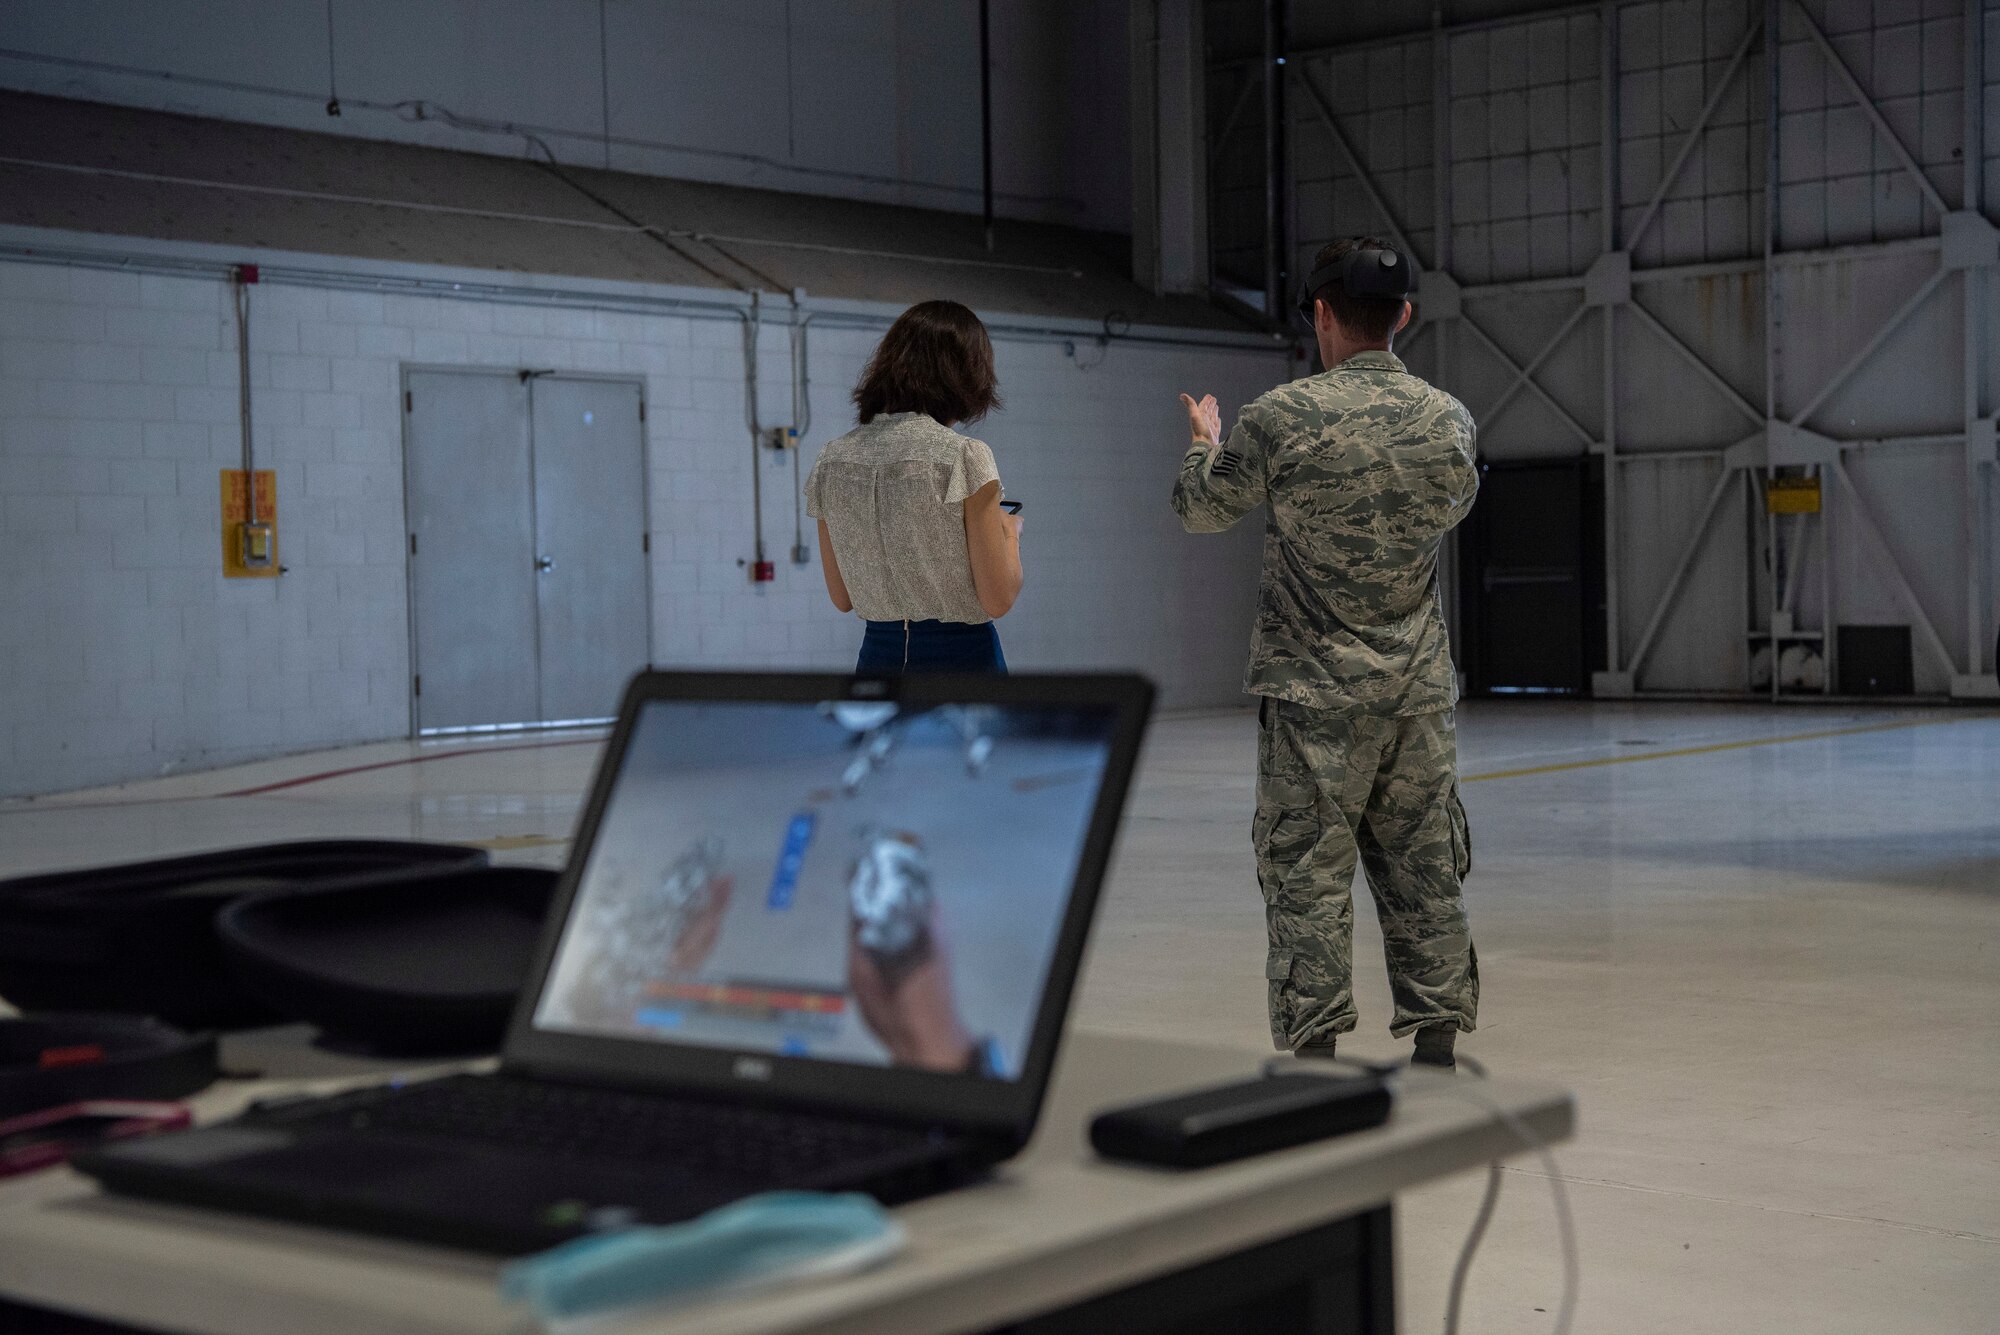 A contractor takes notes on her cell phone as an Airman uses an augmented reality headset.